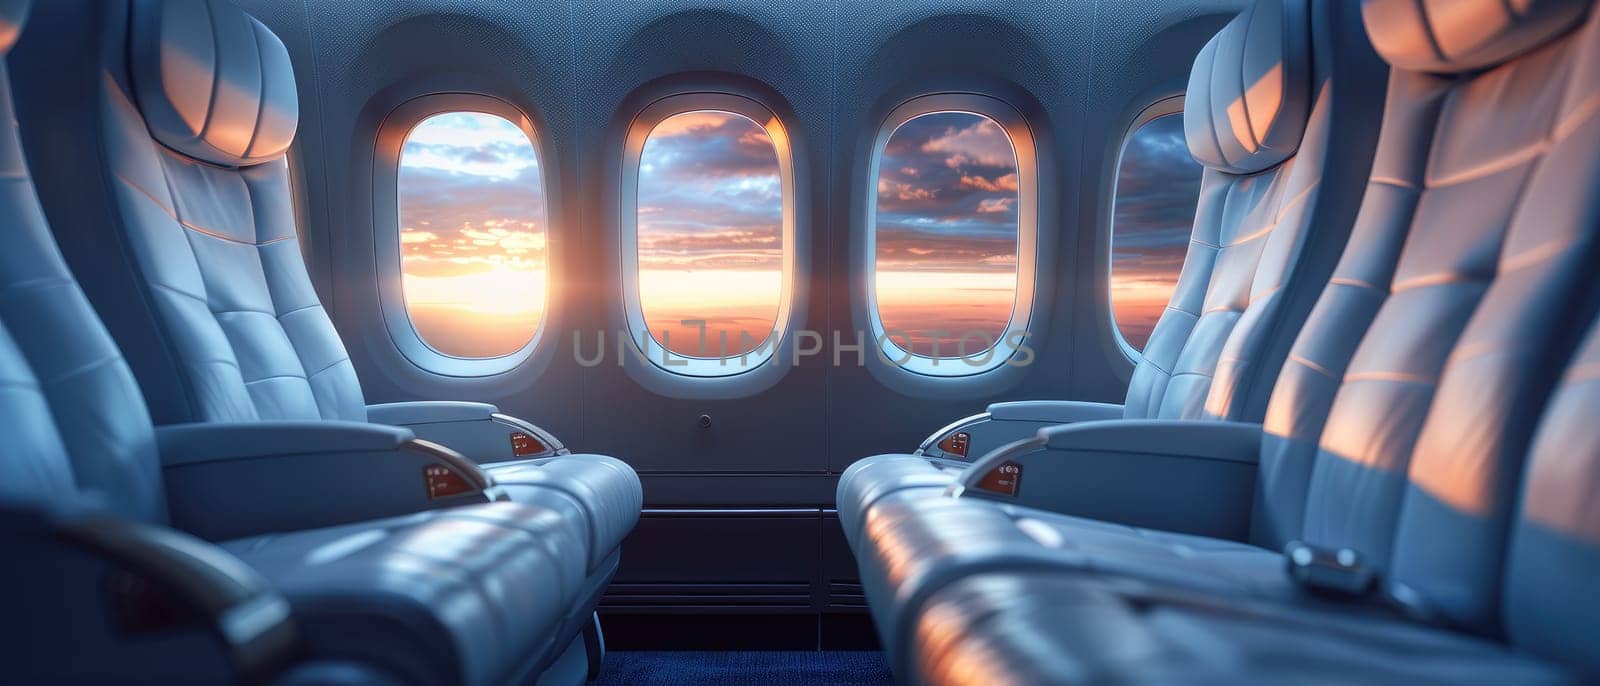 The airplane is filled with white seats and the windows are open by AI generated image.